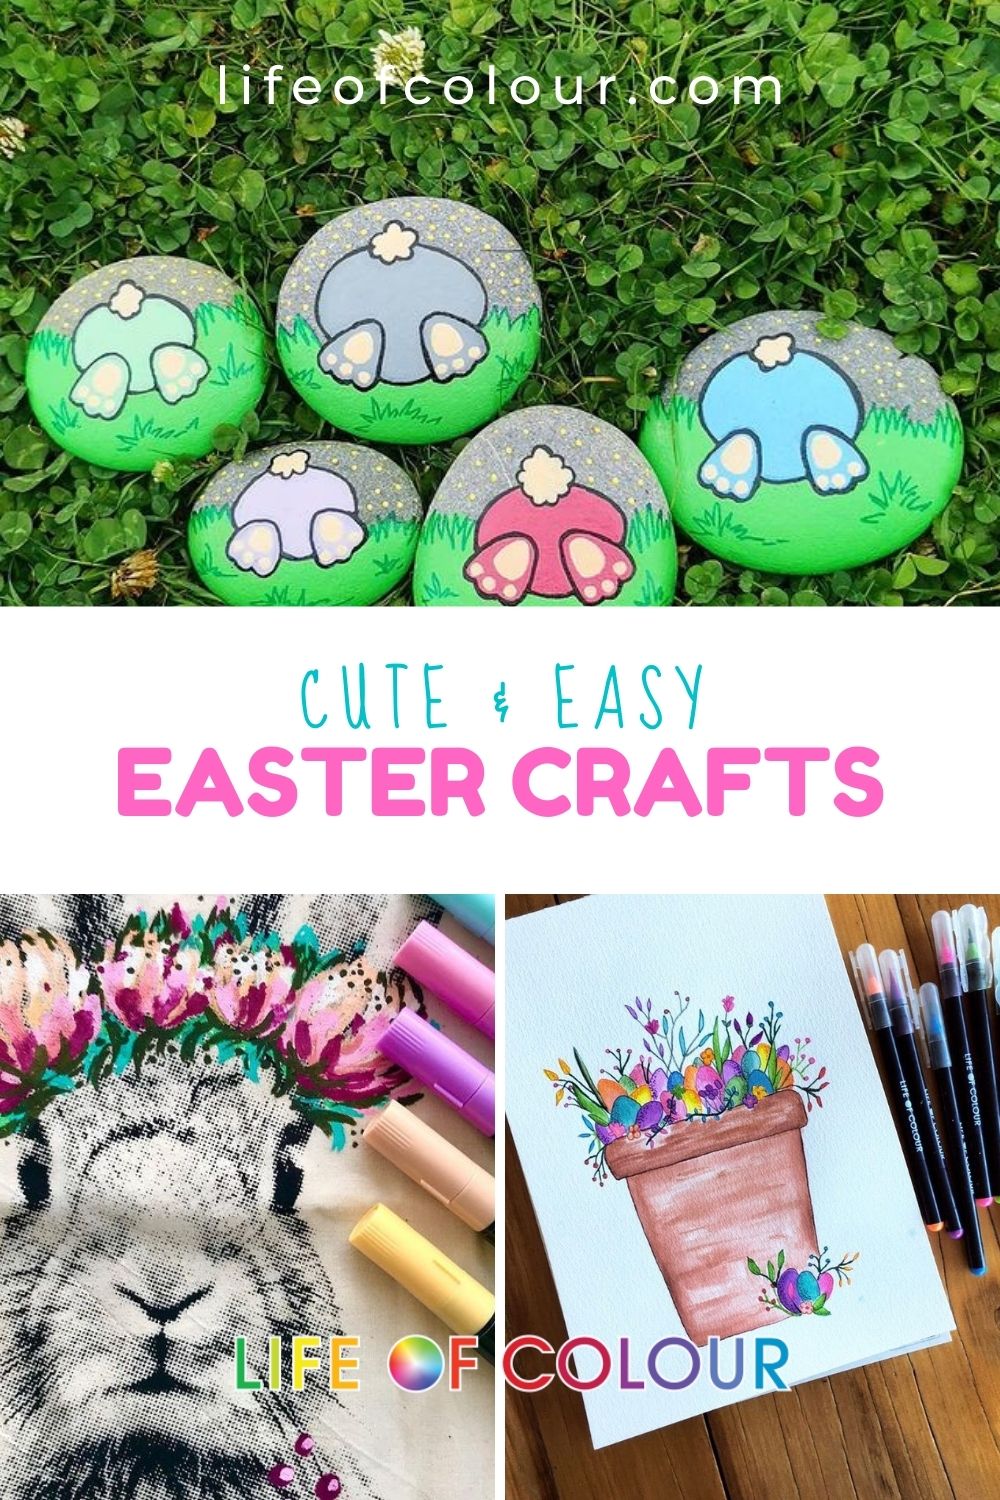 Easter craft ideas you will love to make!